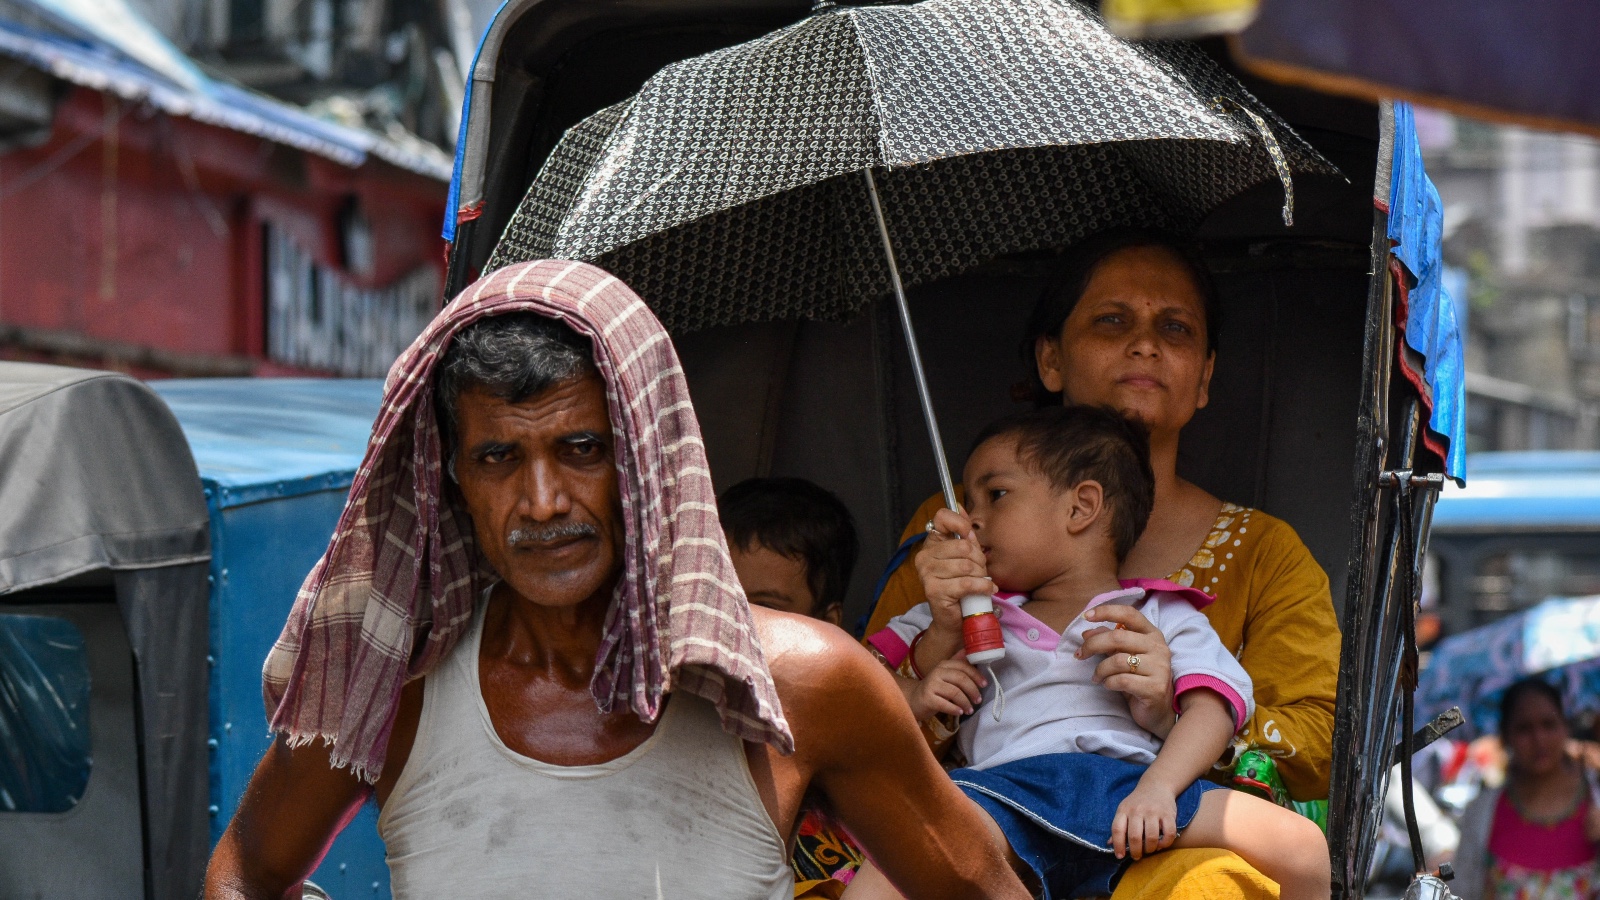 A man drapes a cloth over his head and a mother holds an umbrella over her child inside a hand pulled rickshaw to escape from extreme heat in India